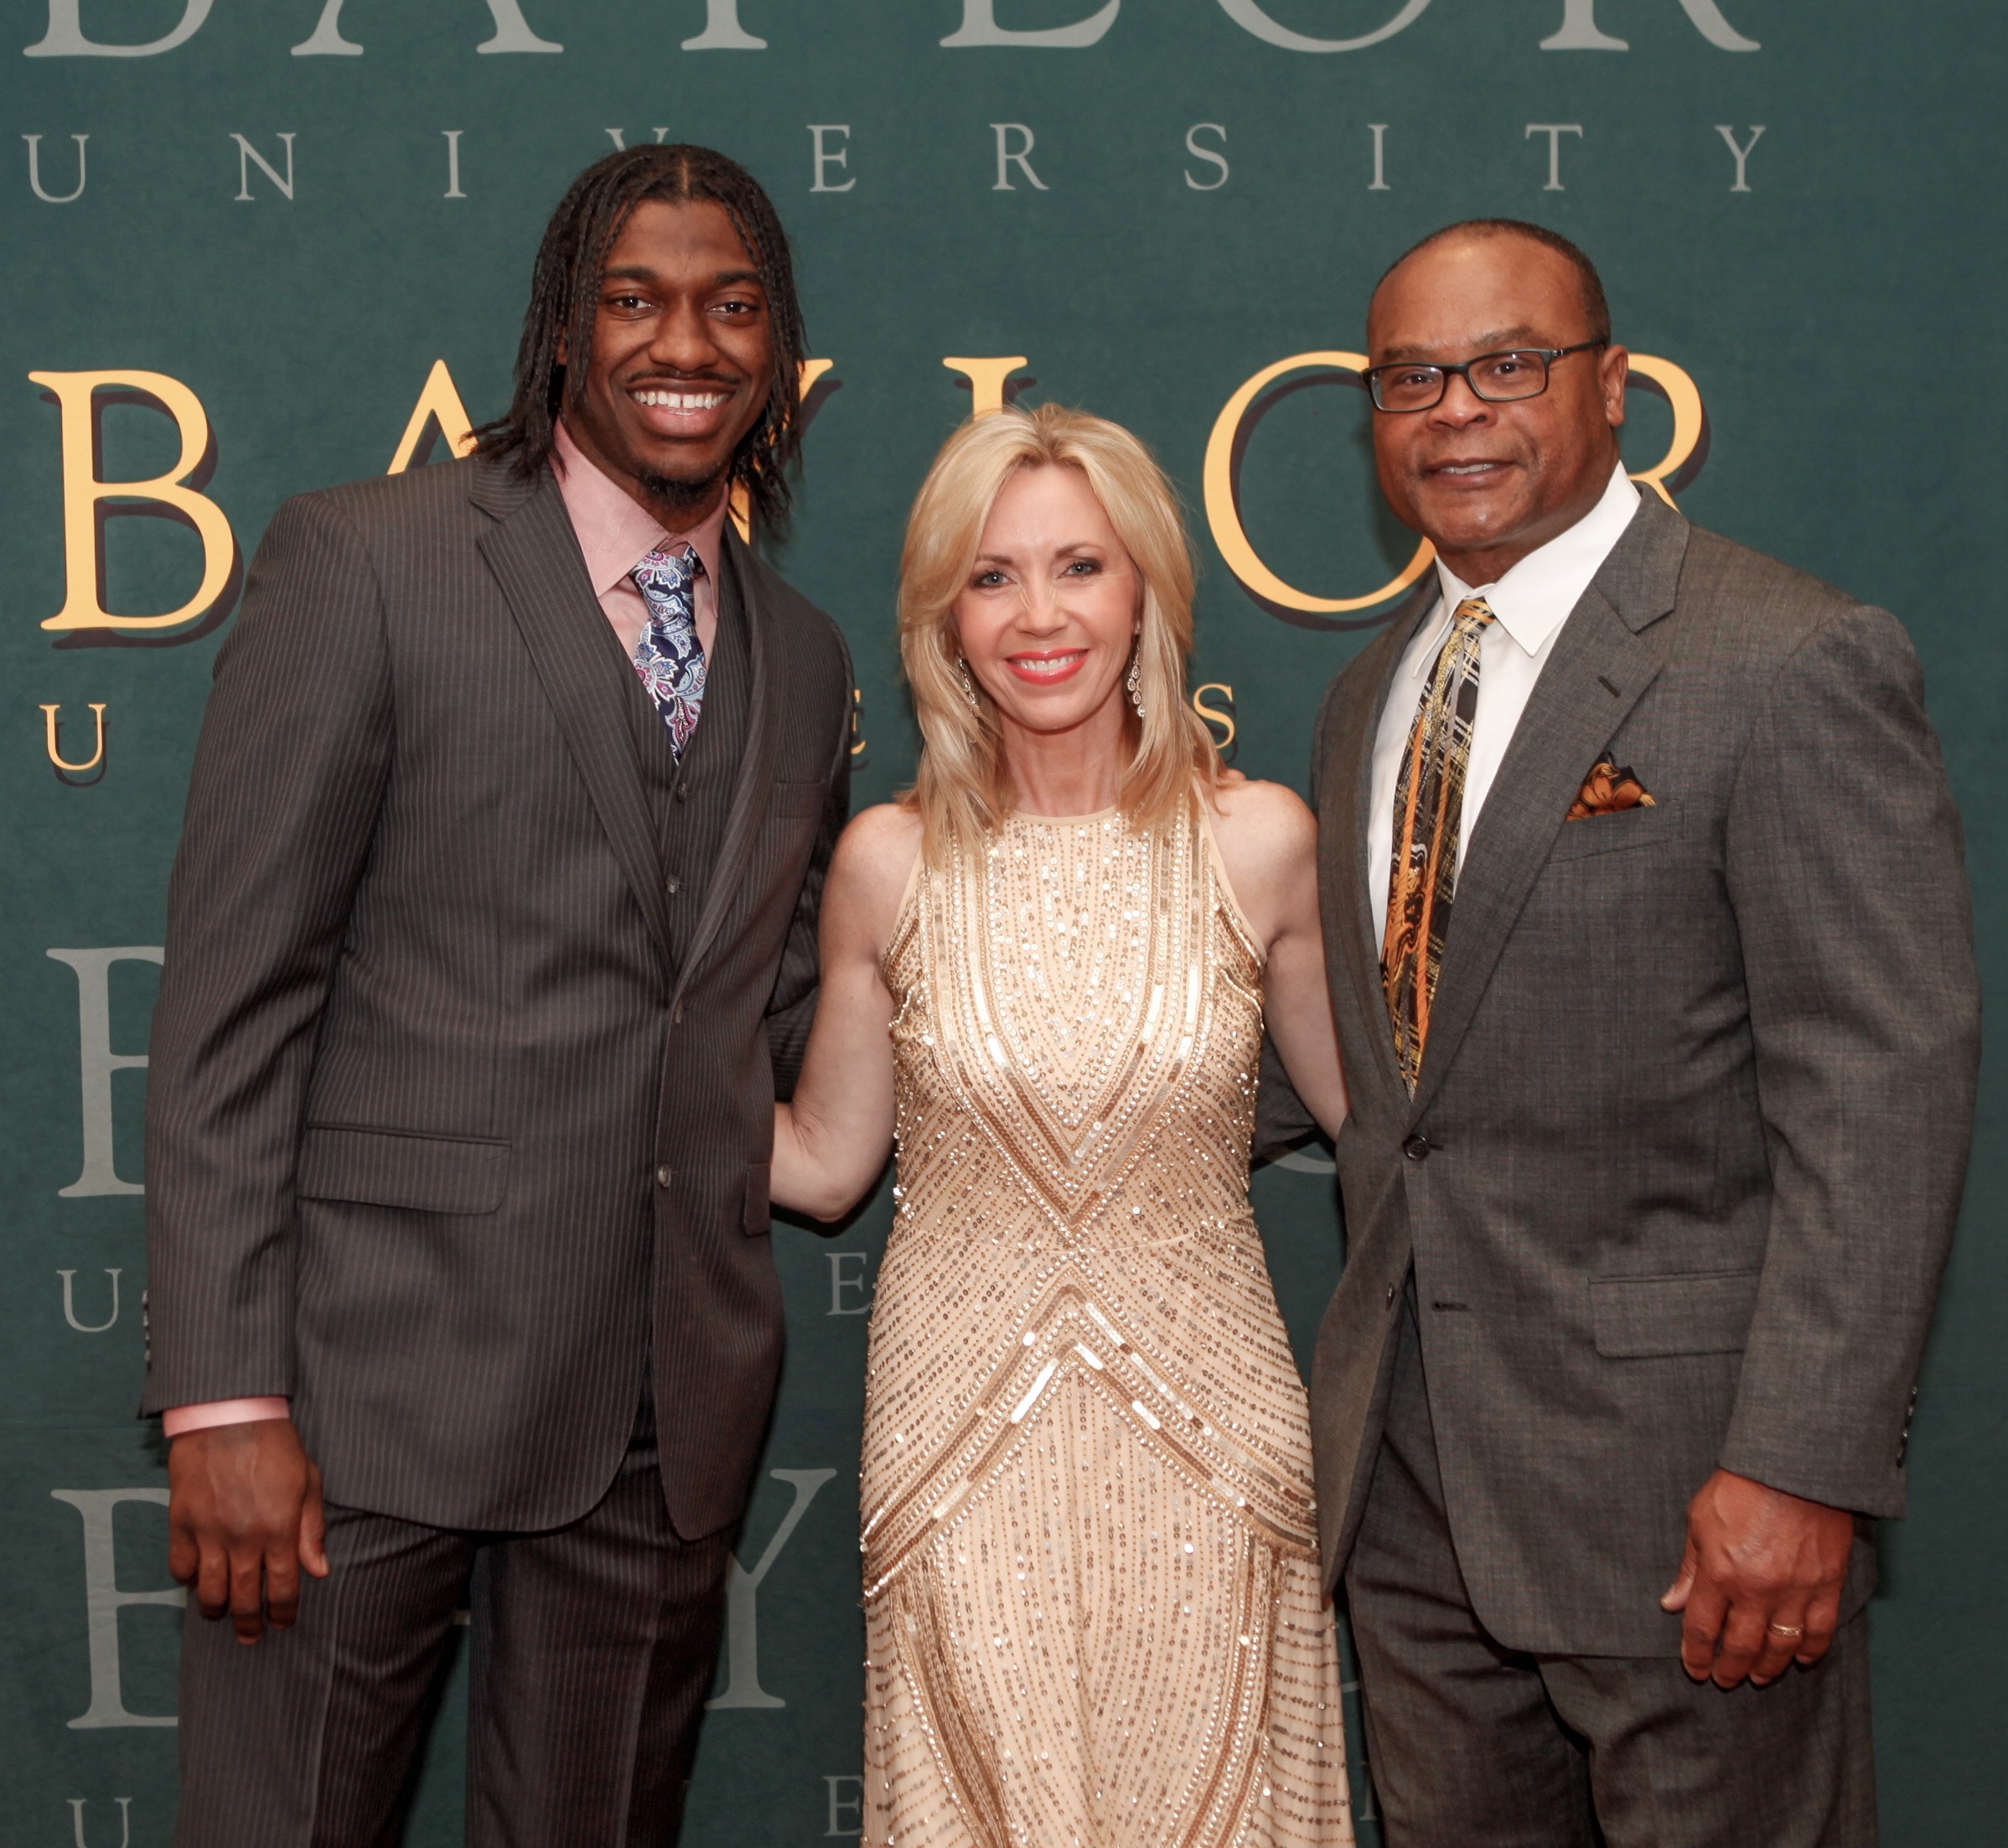 Deb Carson, Robert Griffin III and Mike Singletary at 4th Annual Going for the Gold Gala